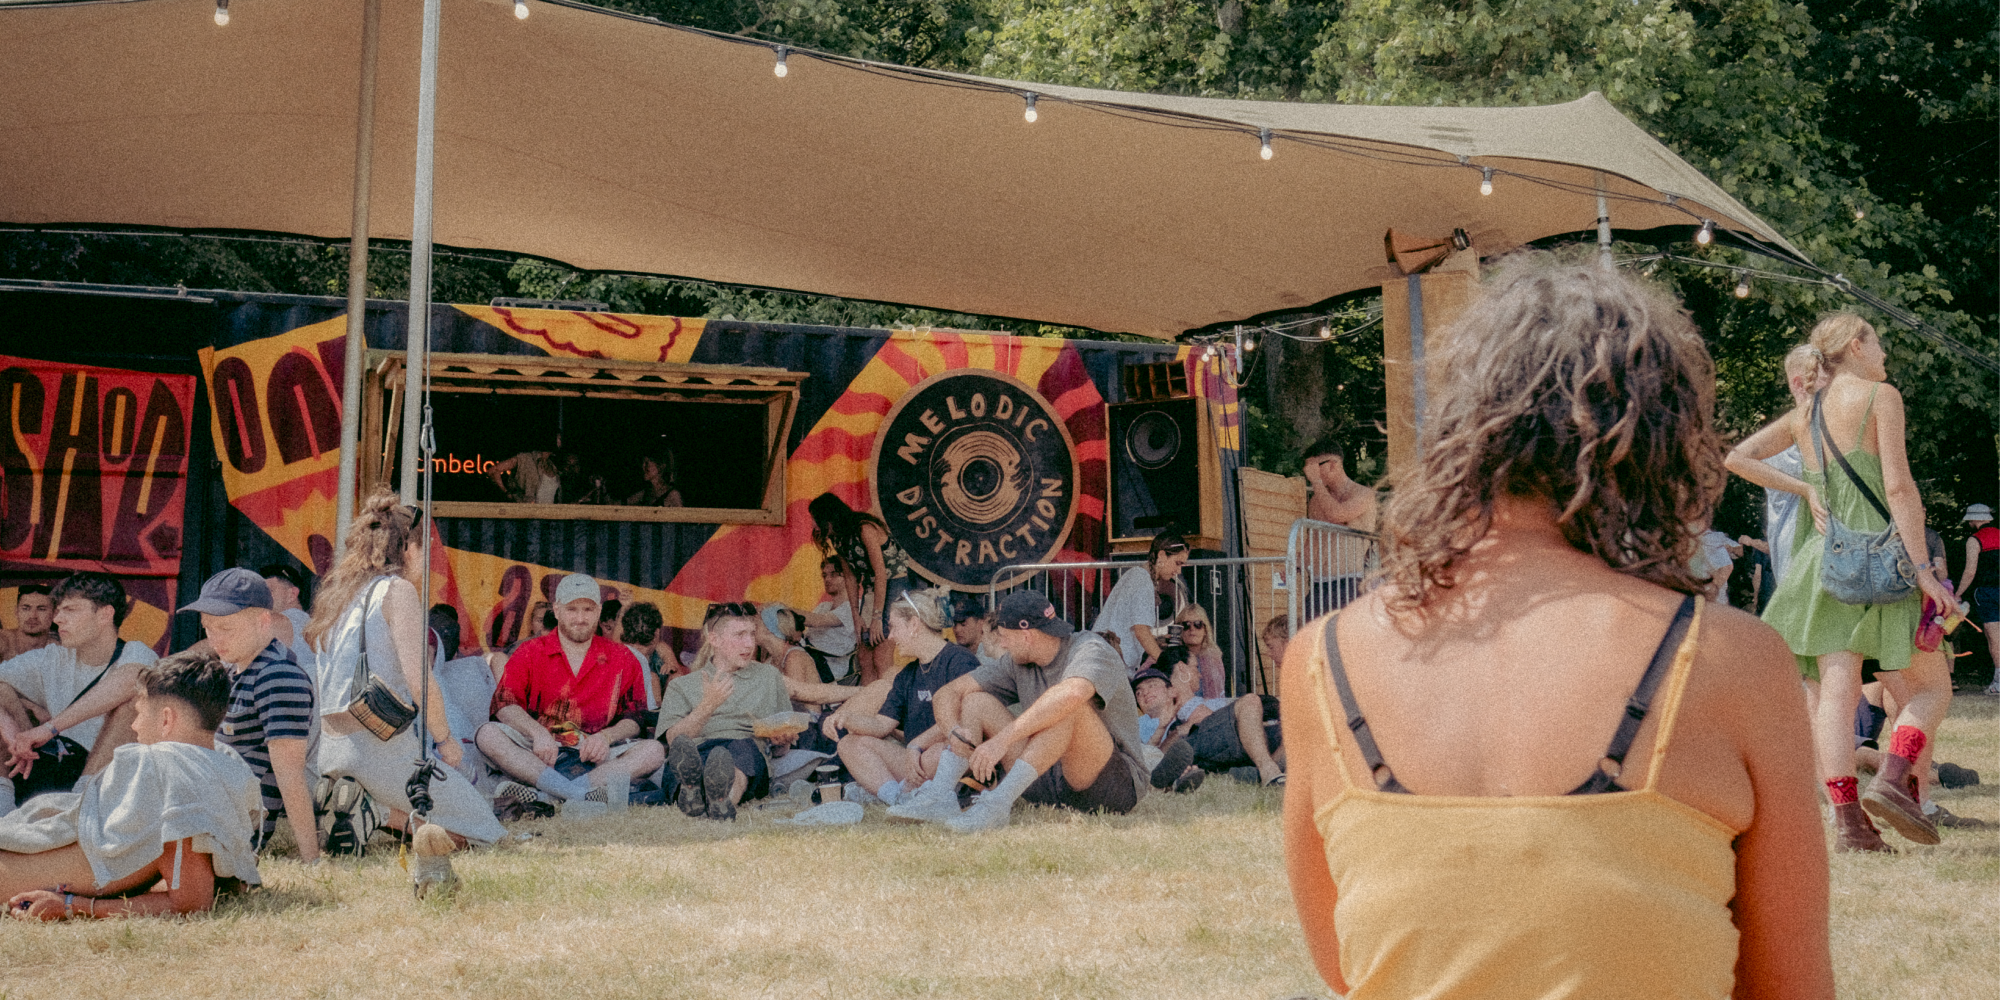 Audio-Technica x Melodic Distraction x NAM Sound System op het Gottwood Festival